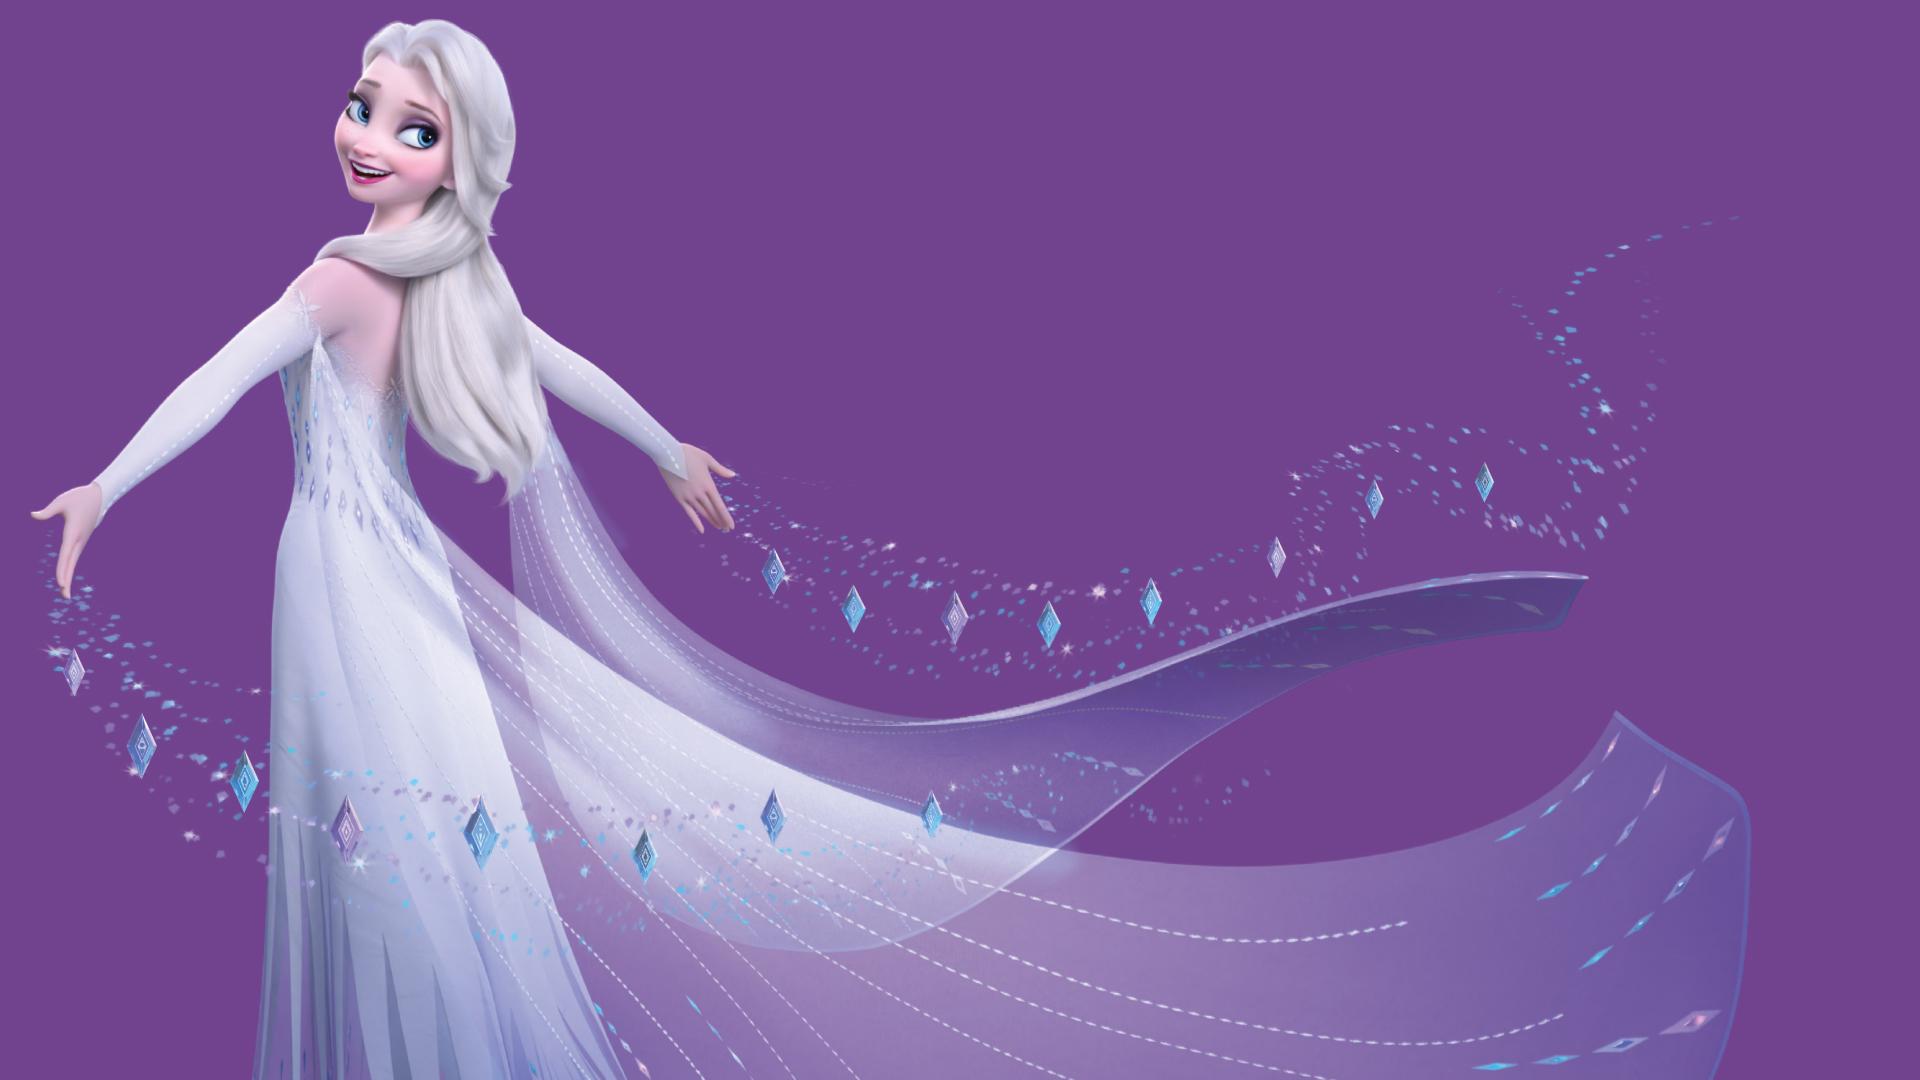 new Frozen 2 HD wallpaper with Elsa in white dress and her